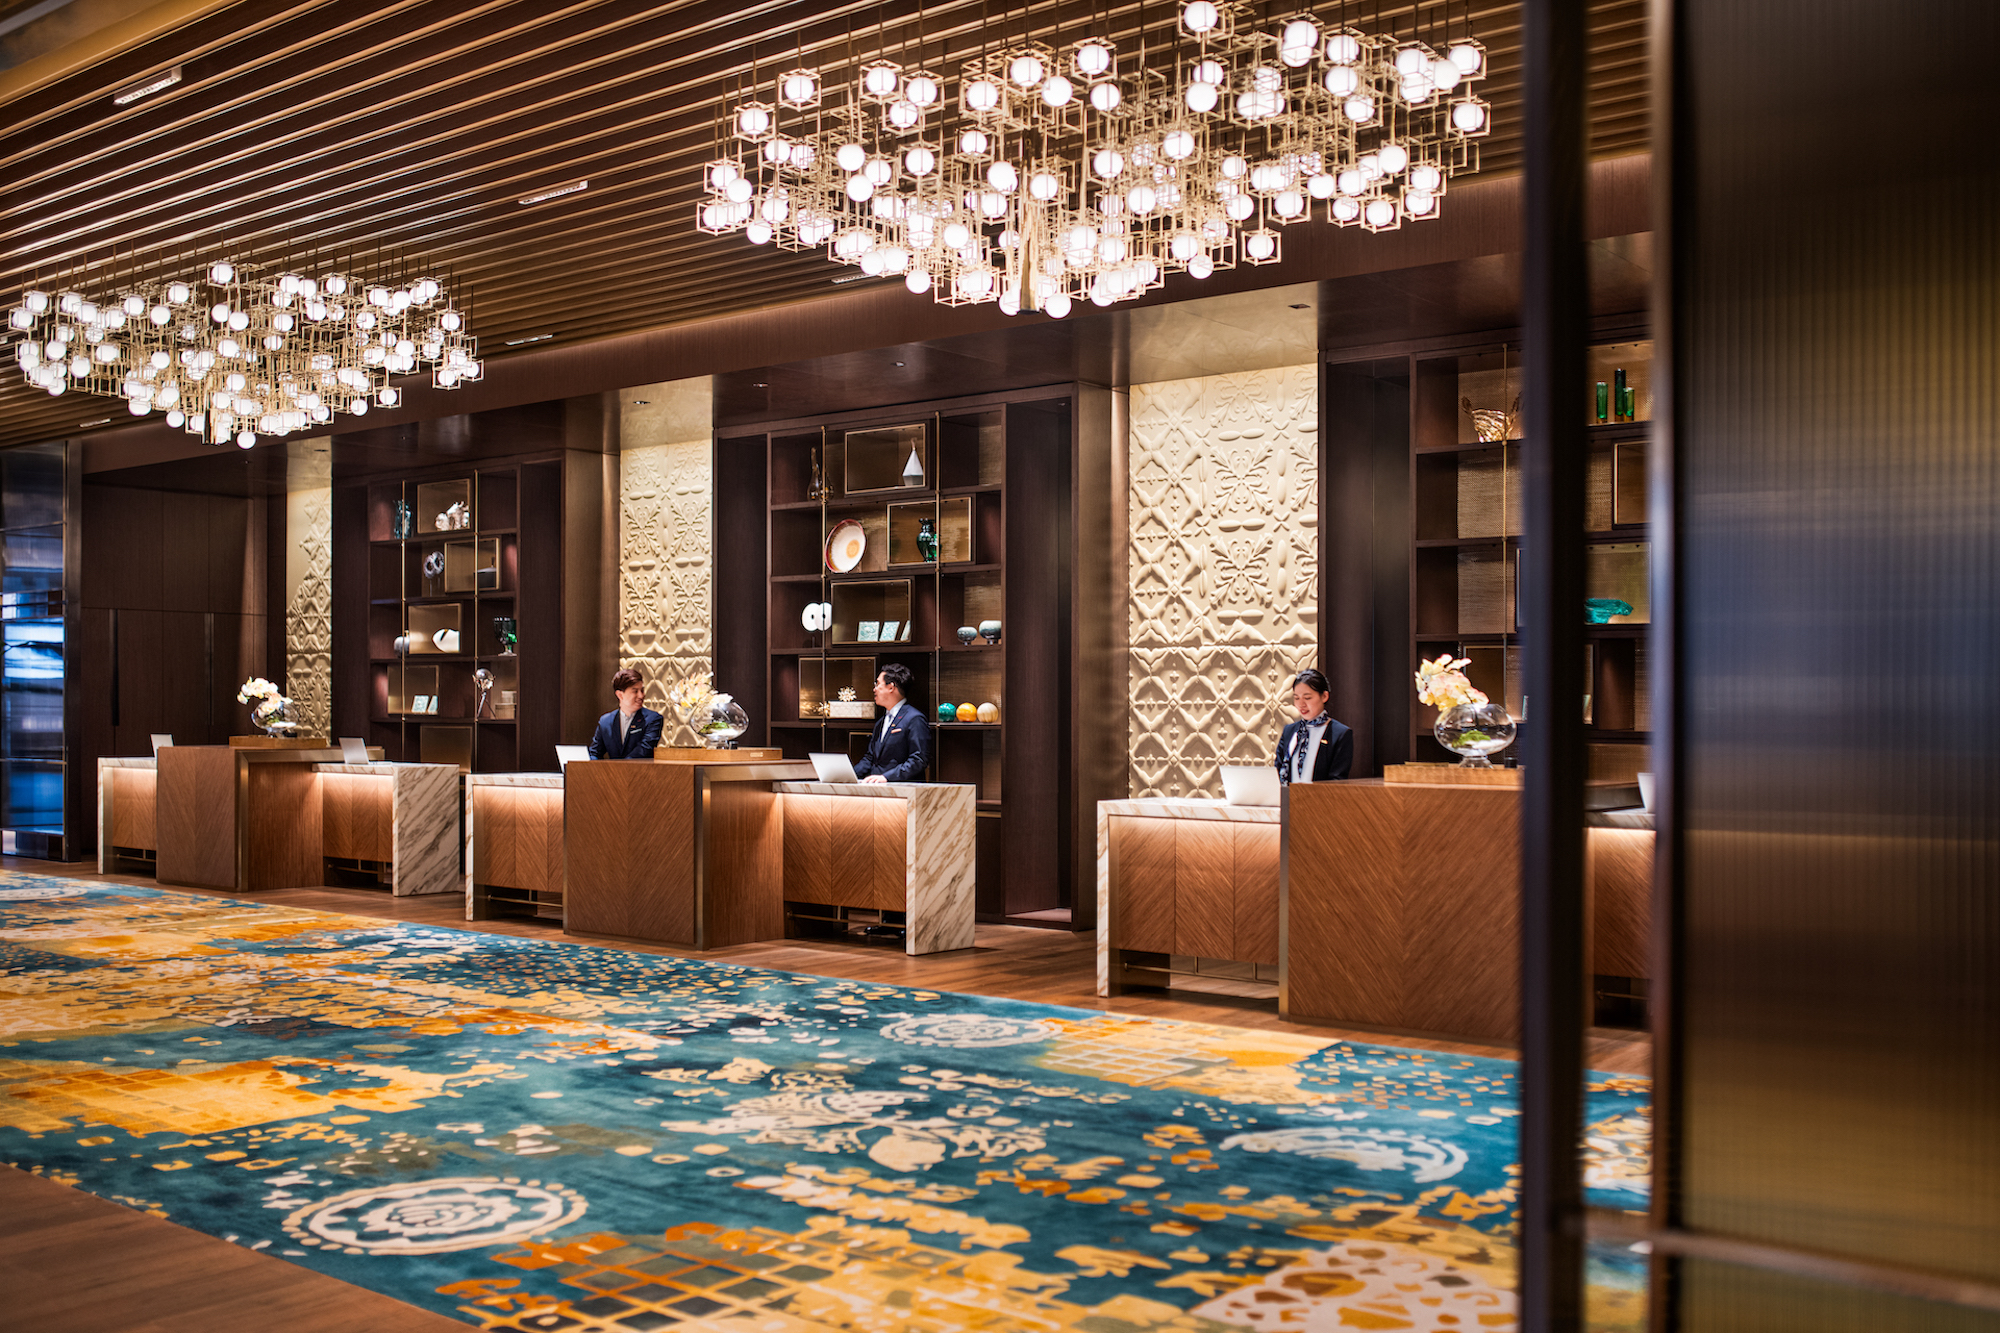 A celebration of place: The Andaz Macau opens its doors